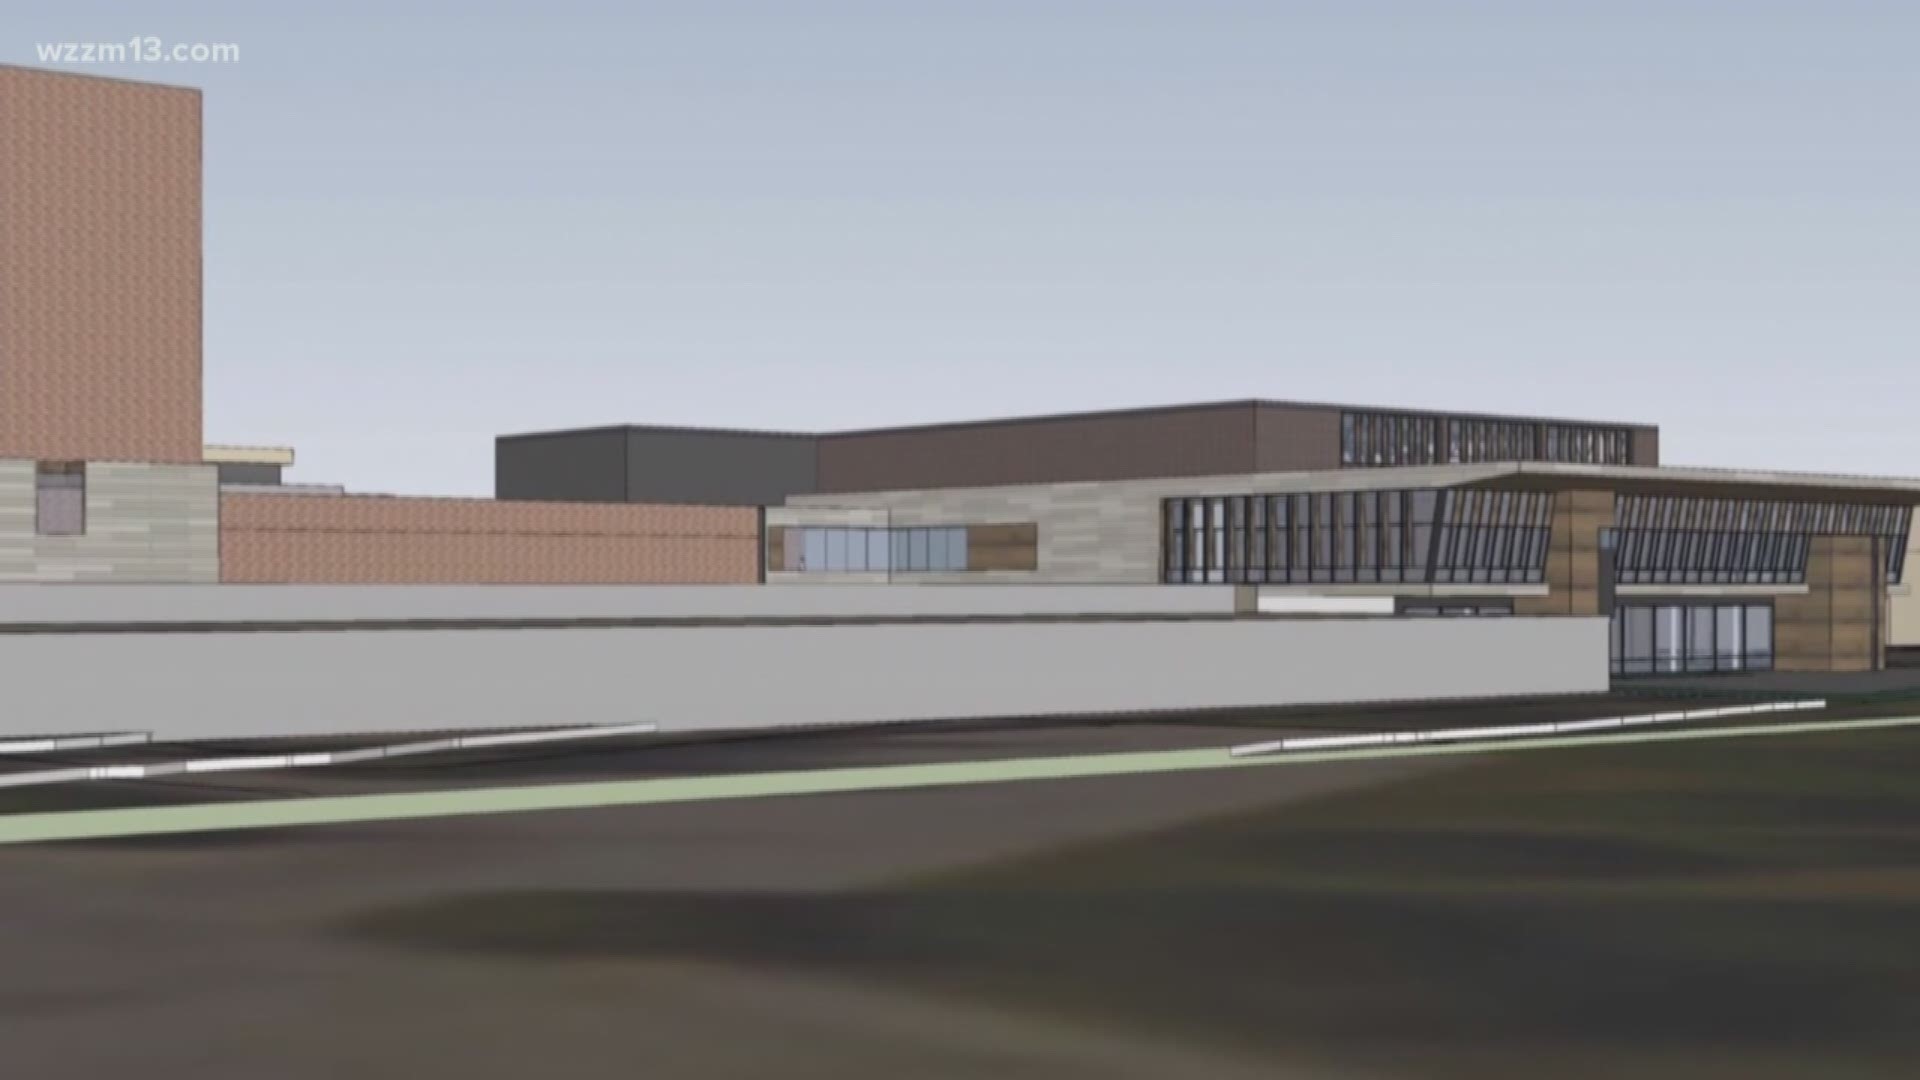 Work to build the Muskegon Convention Center has been held up by a prevailing wage decision.